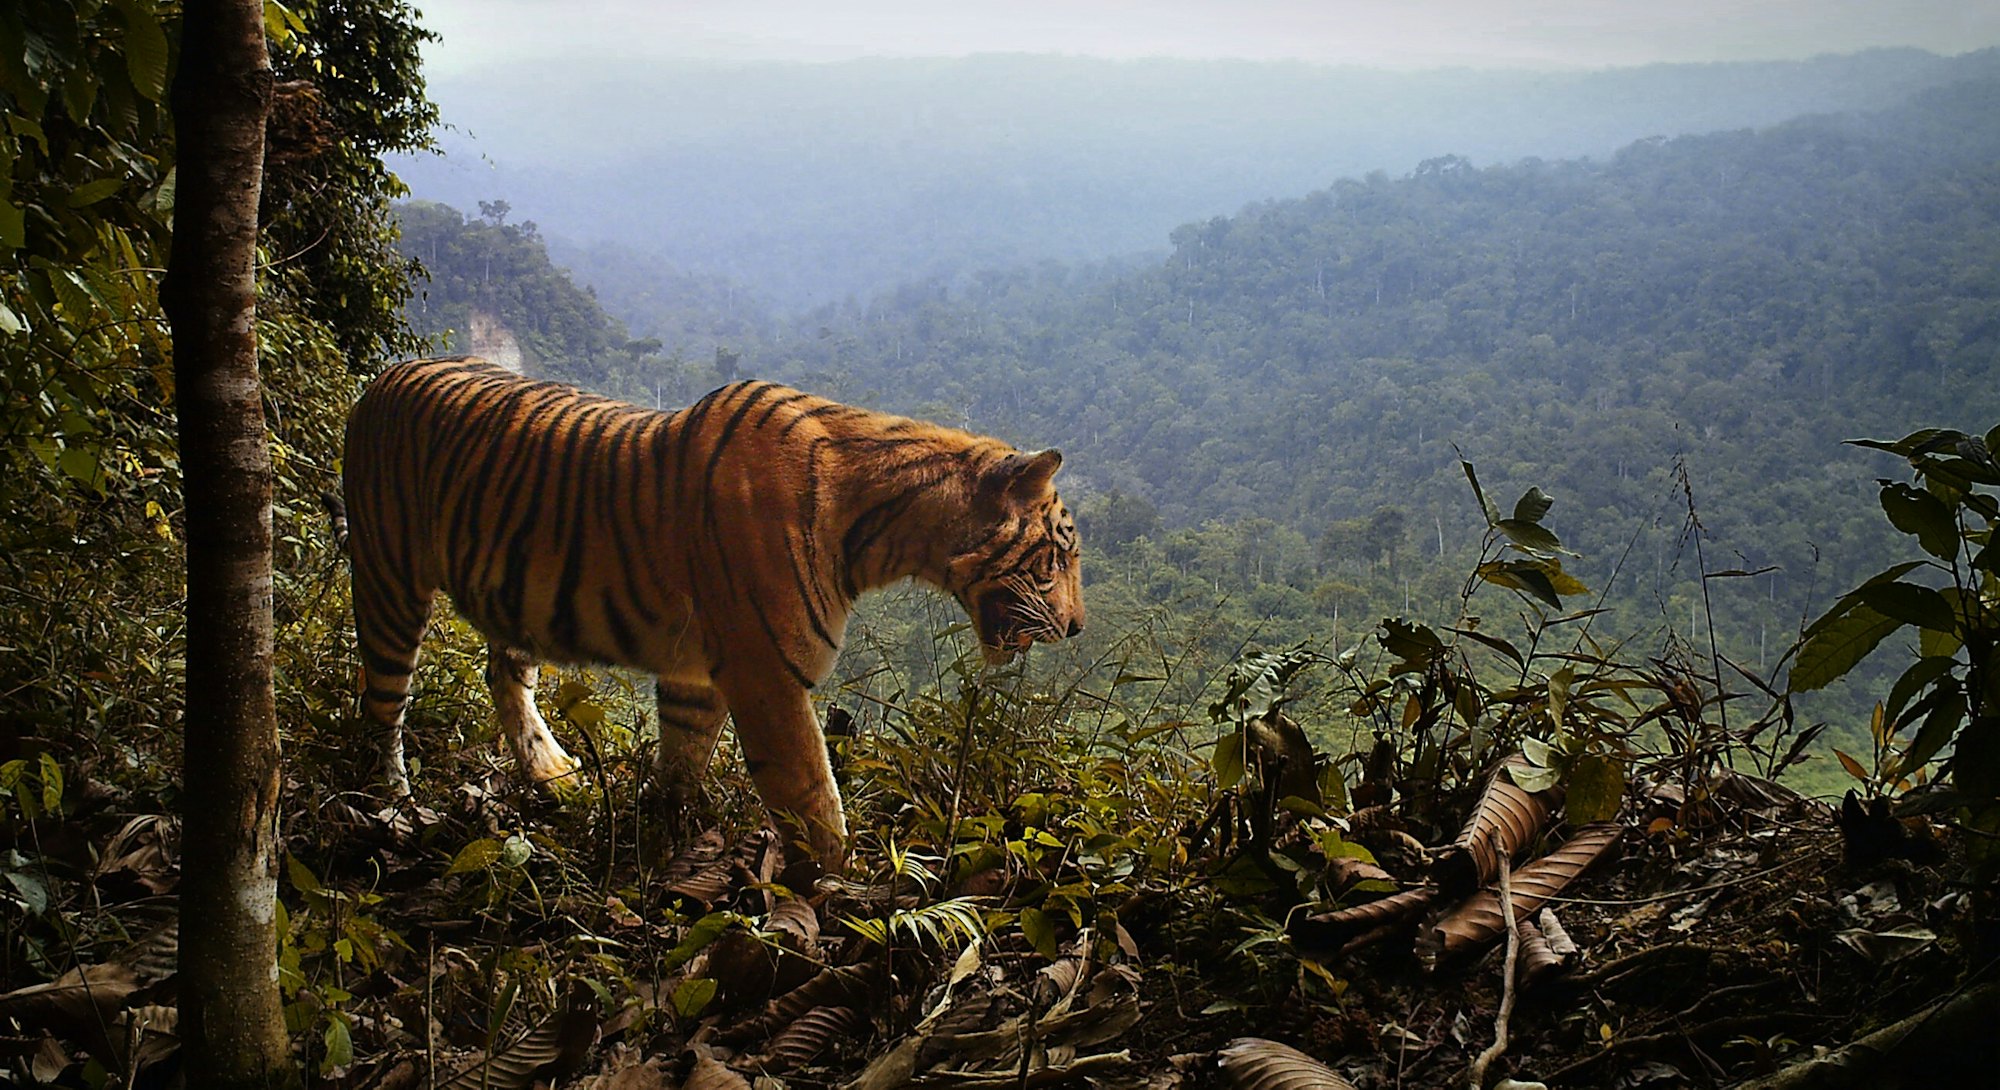 Sumatra tiger on the forest's edge.